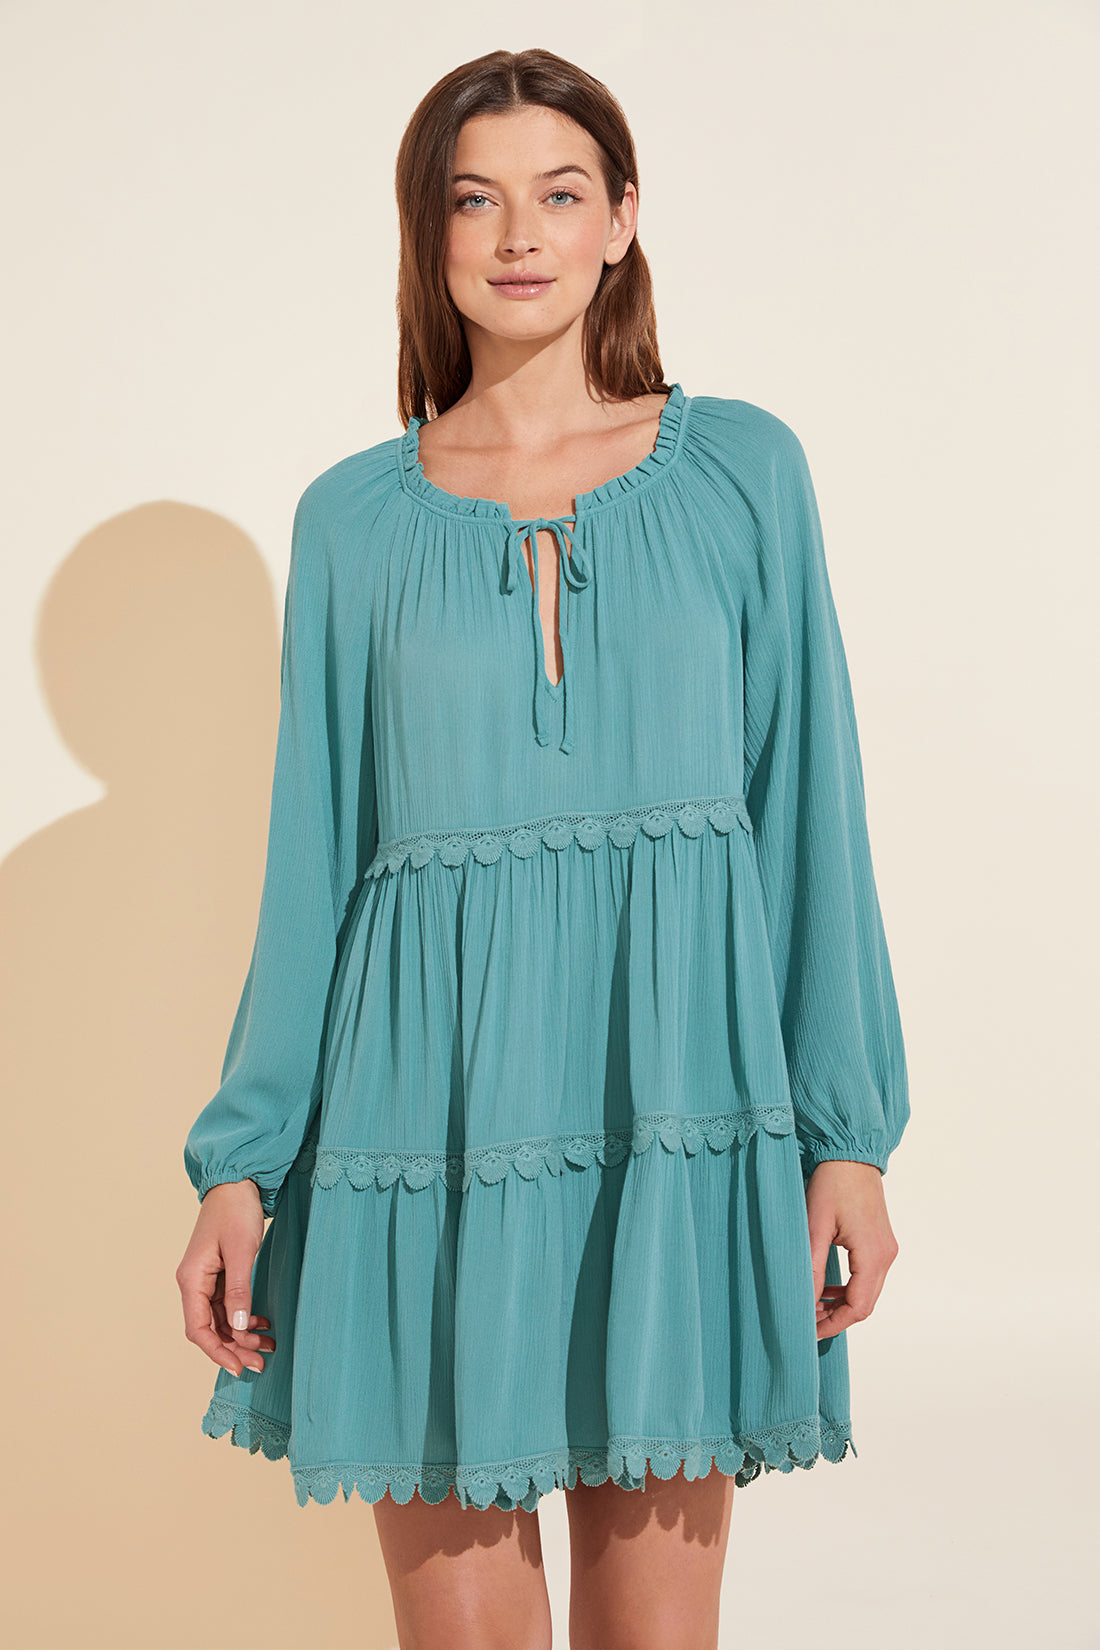 Sofia Breezy Weave Cover-Up - Ocean Bay